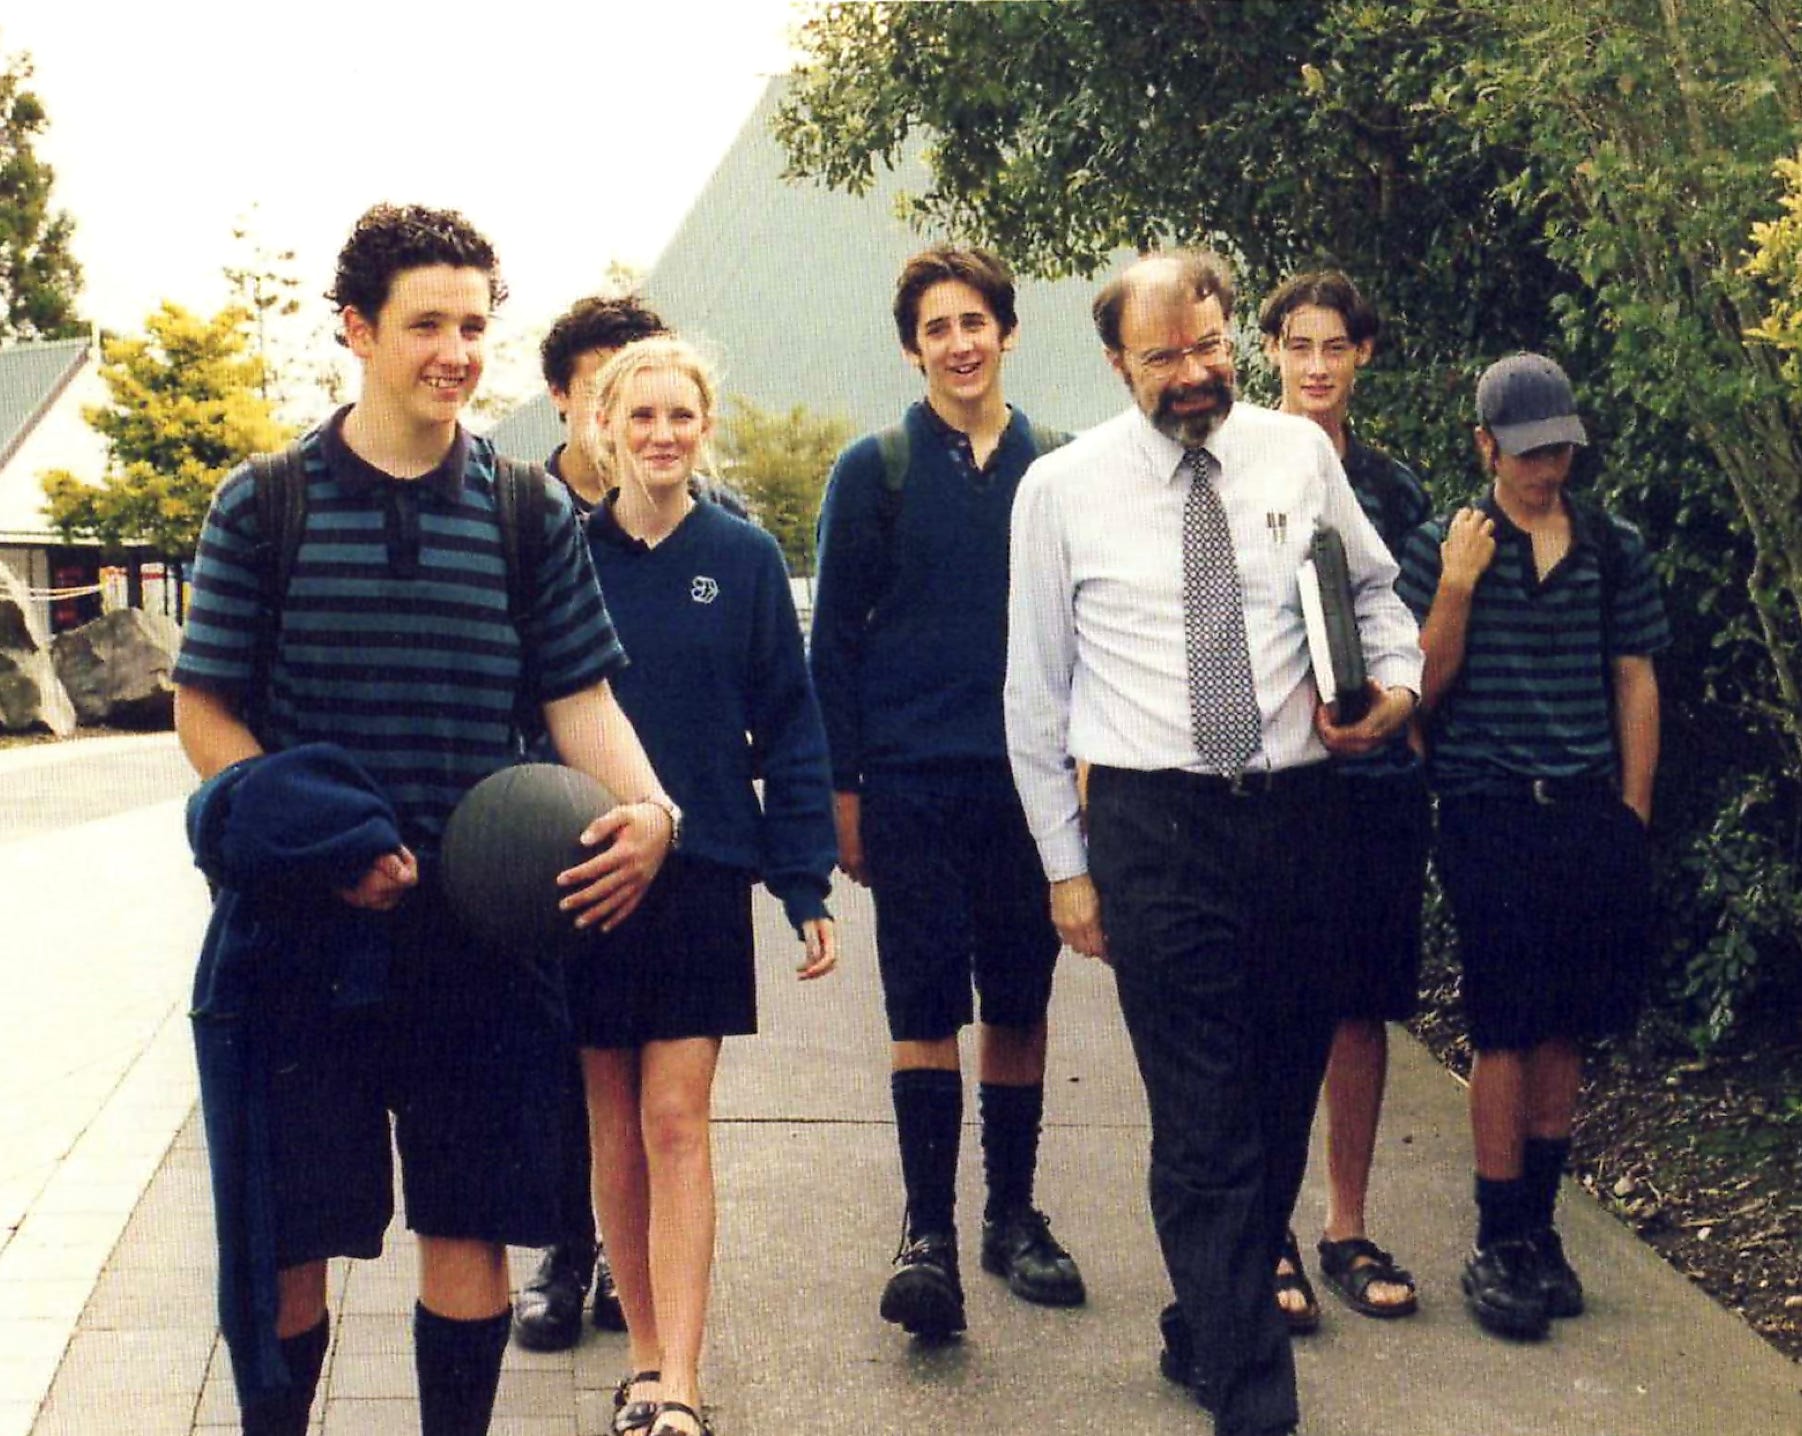 In March 1999, while Stephen Codrington was Chief Executive (i.e. Head of the School) at Kristin School in Auckland, New Zealand, he decided to “be” a student for a day, following the routine of a typical Year 10 student for the day to understand and appreciate their experience.  